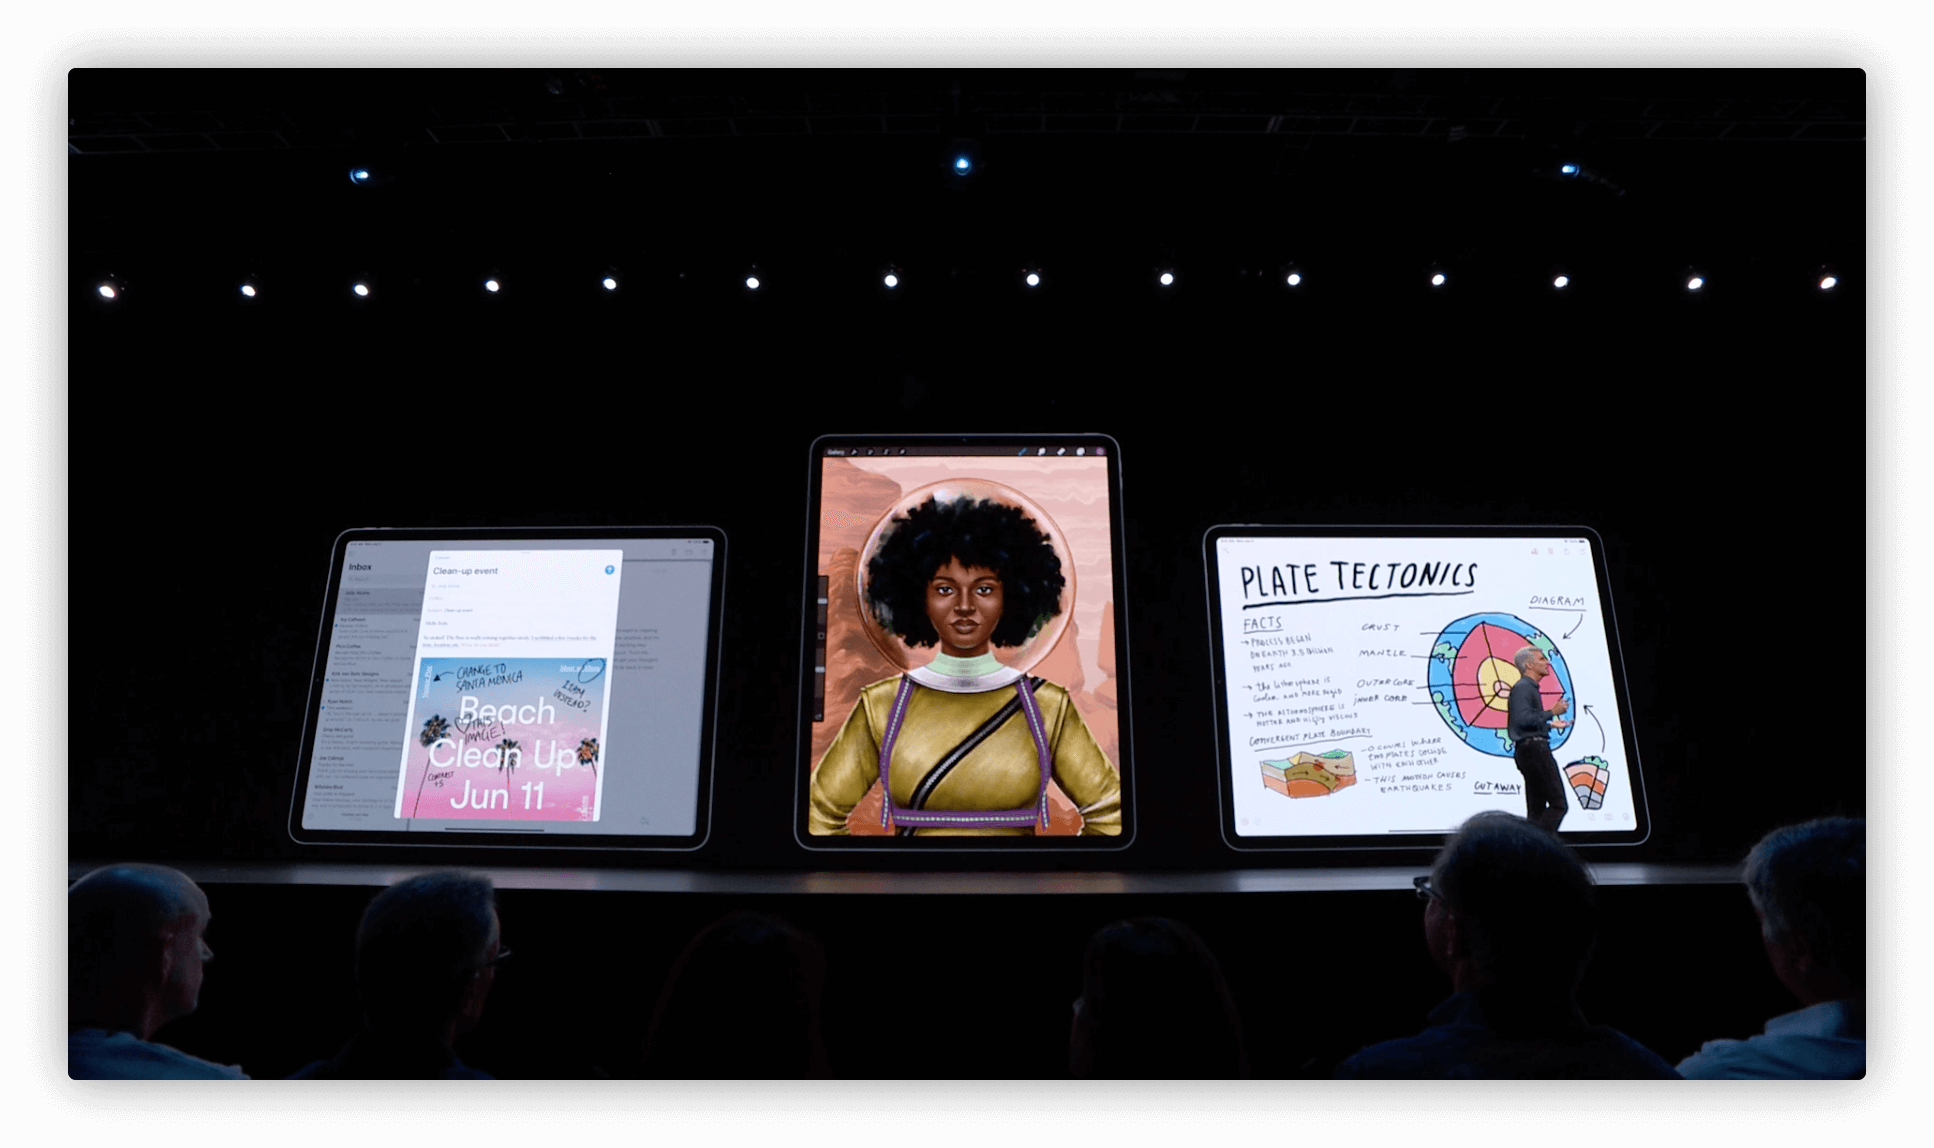 iOS for iPad is now an iPad OS. Here are all the new products